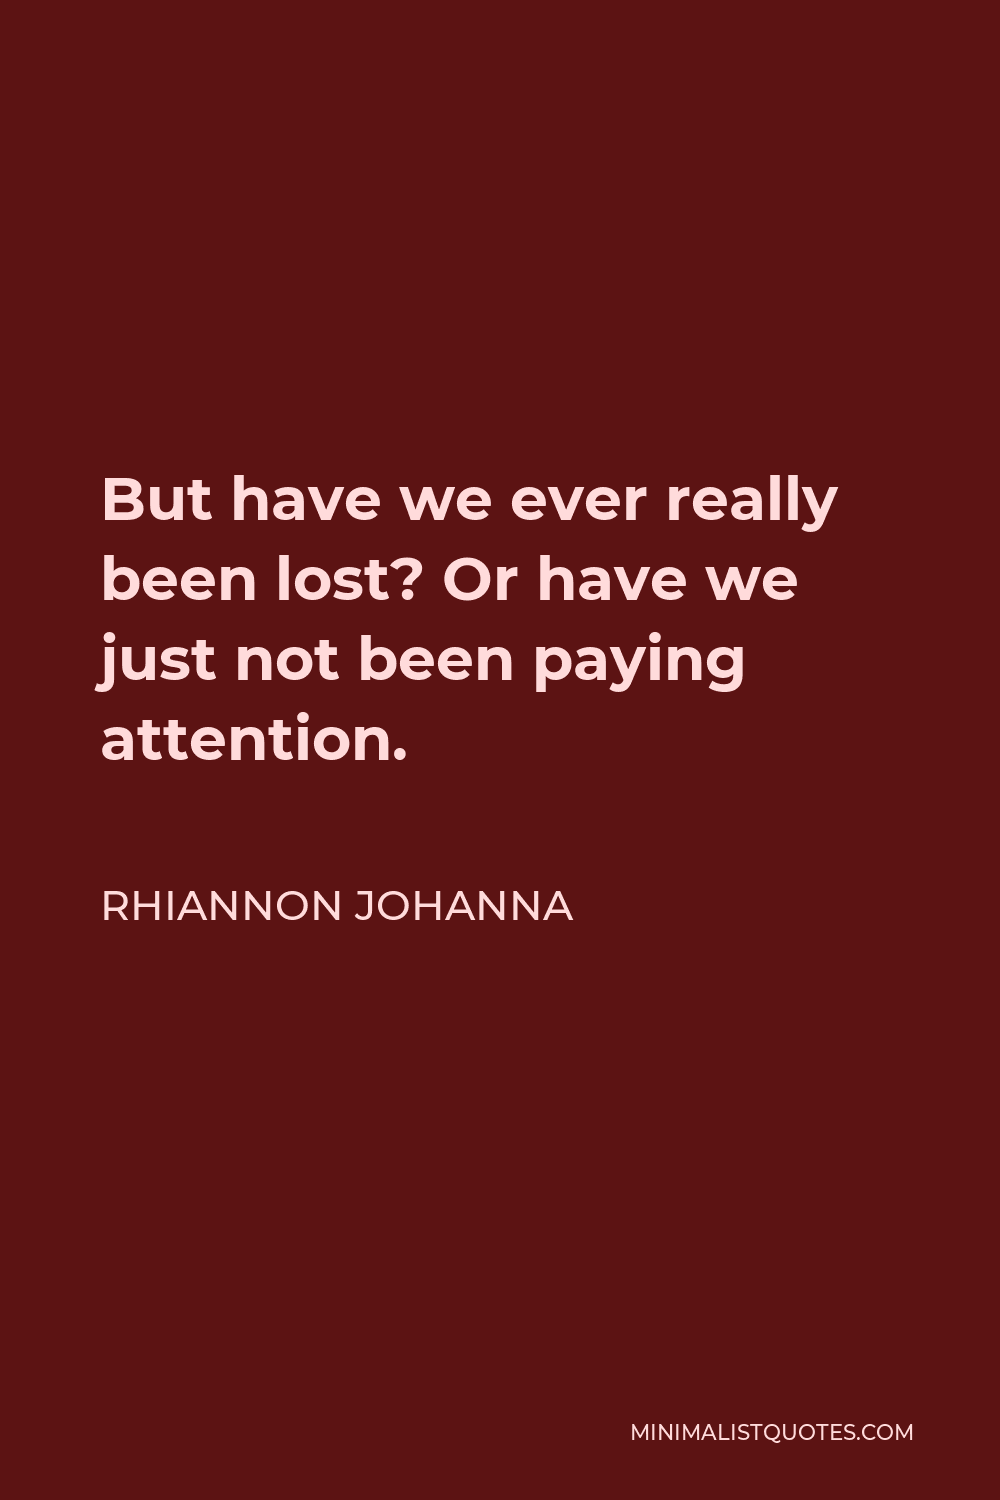 Rhiannon Johanna Quote - But have we ever really been lost? Or have we just not been paying attention.